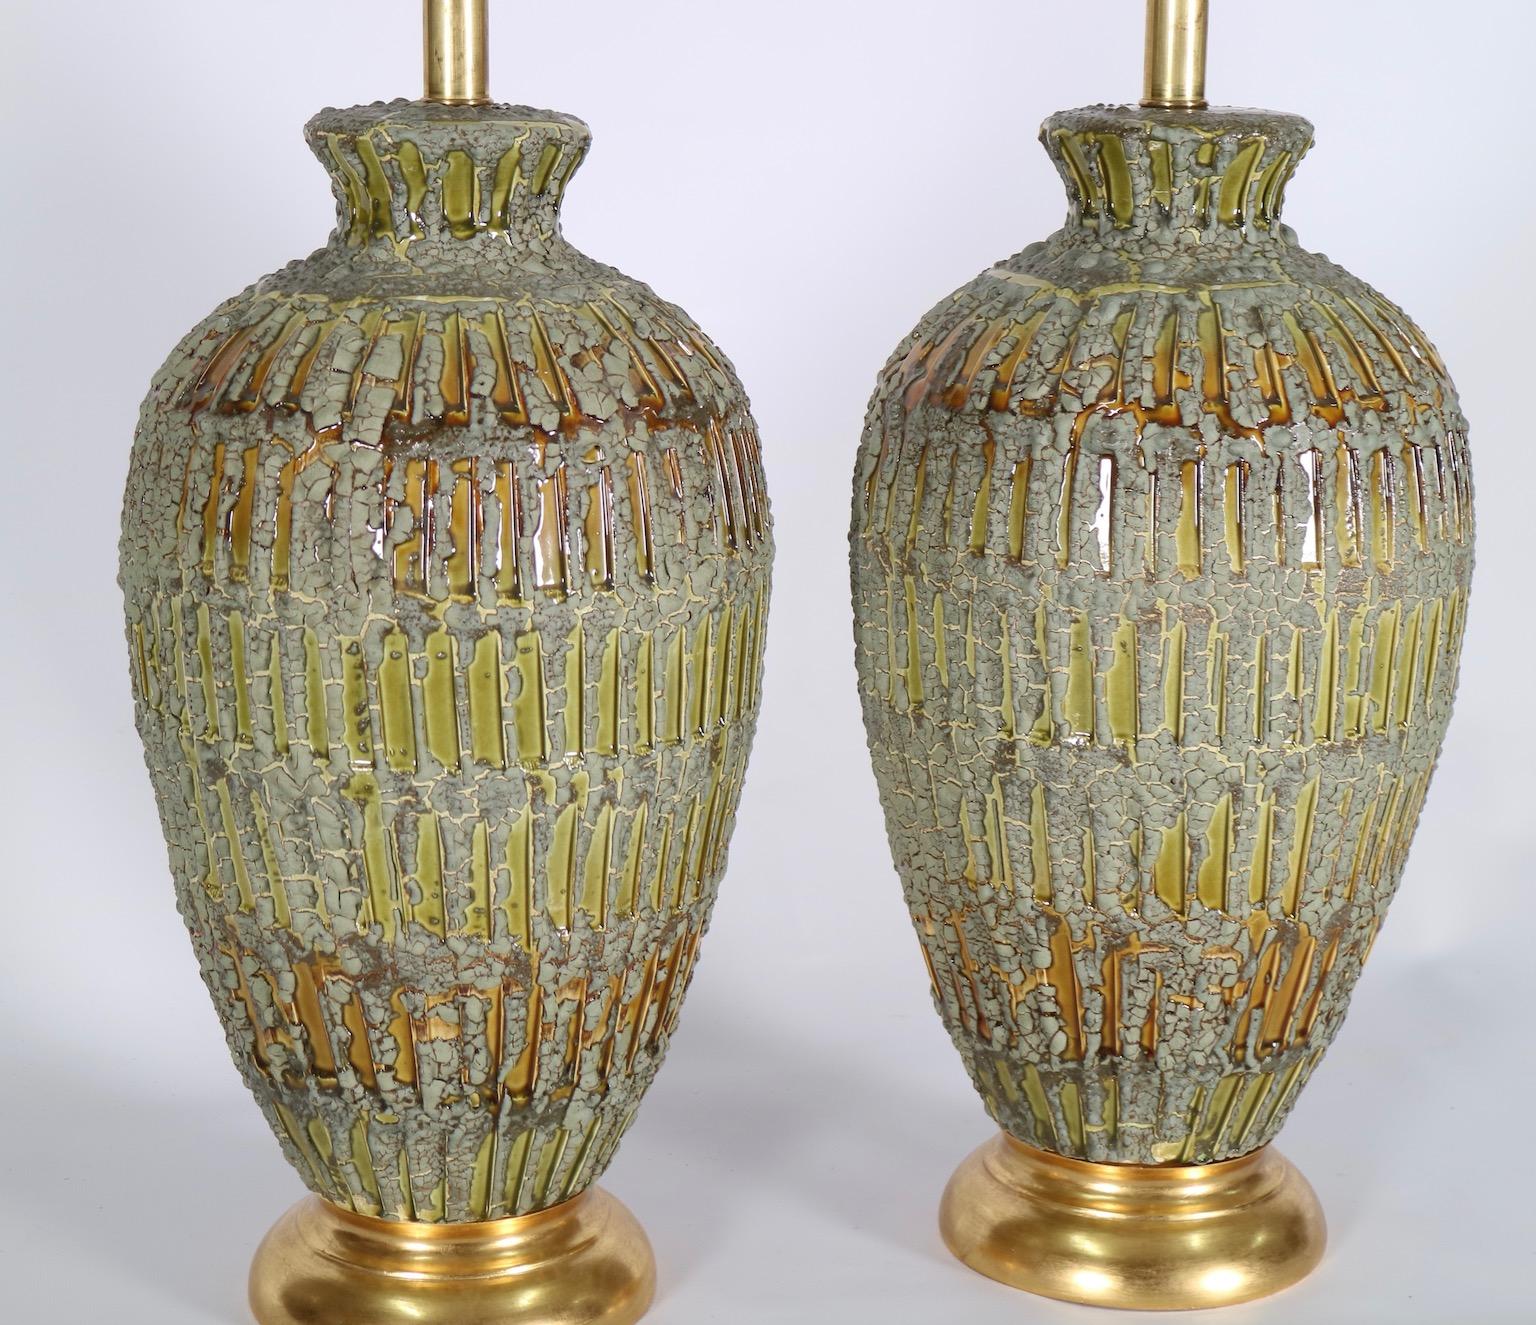 Italian Hollywood Regency Lamps Lava Glazed in Green and Gold Tones 1